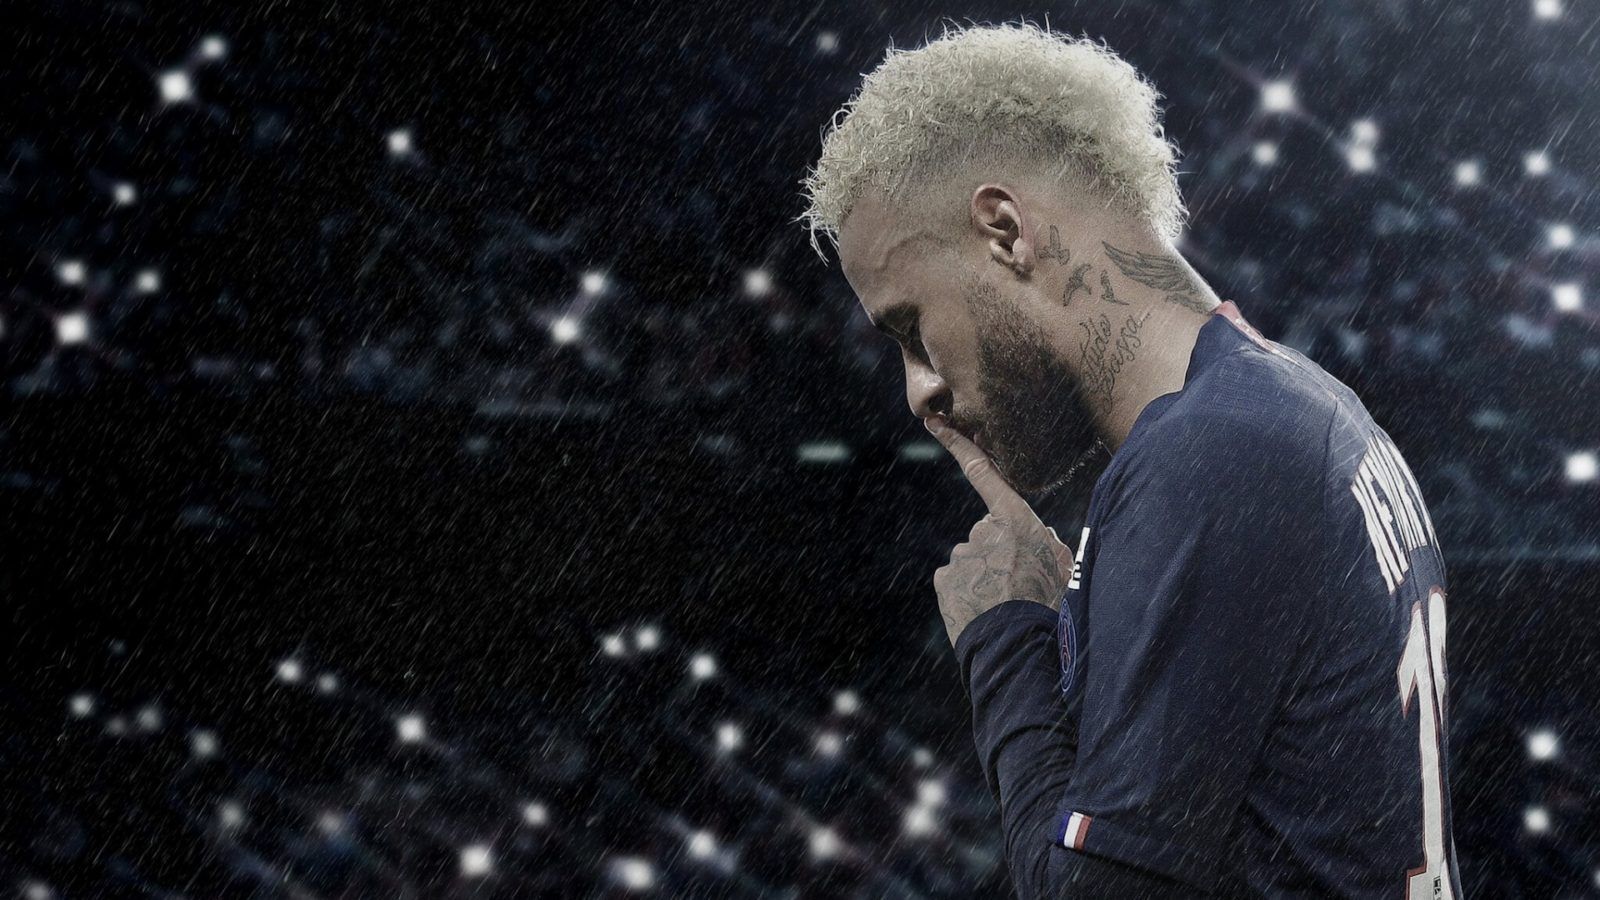 ‘Neymar: The Perfect Chaos’ trailer shows highs and lows of the Brazilian football player